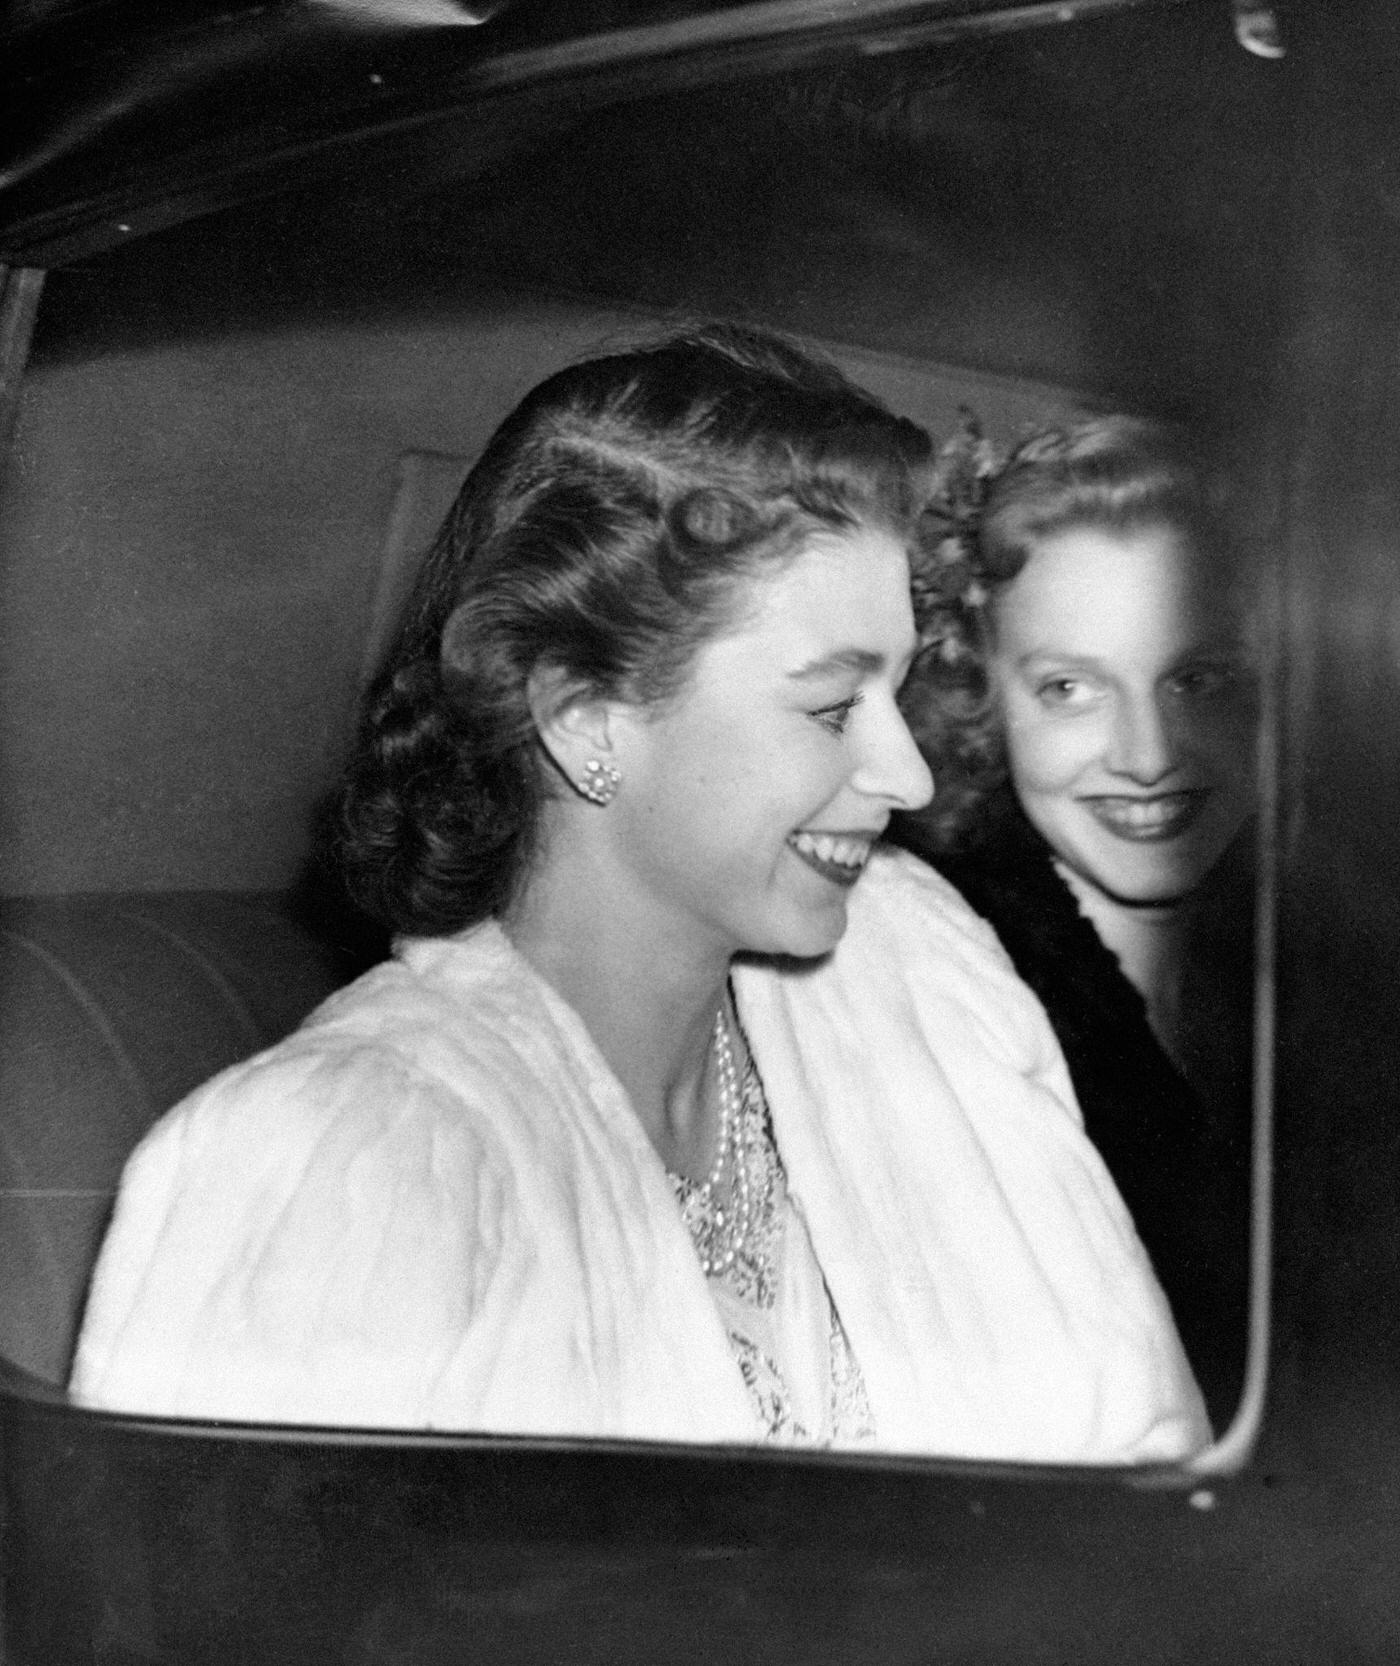 Princess Elizabeth driving from Buckingham Palace, the day before the announcement by the King of the engagement of Princess Elizabeth and Lieutenant Philip Mountbatten, London, England, 1947.